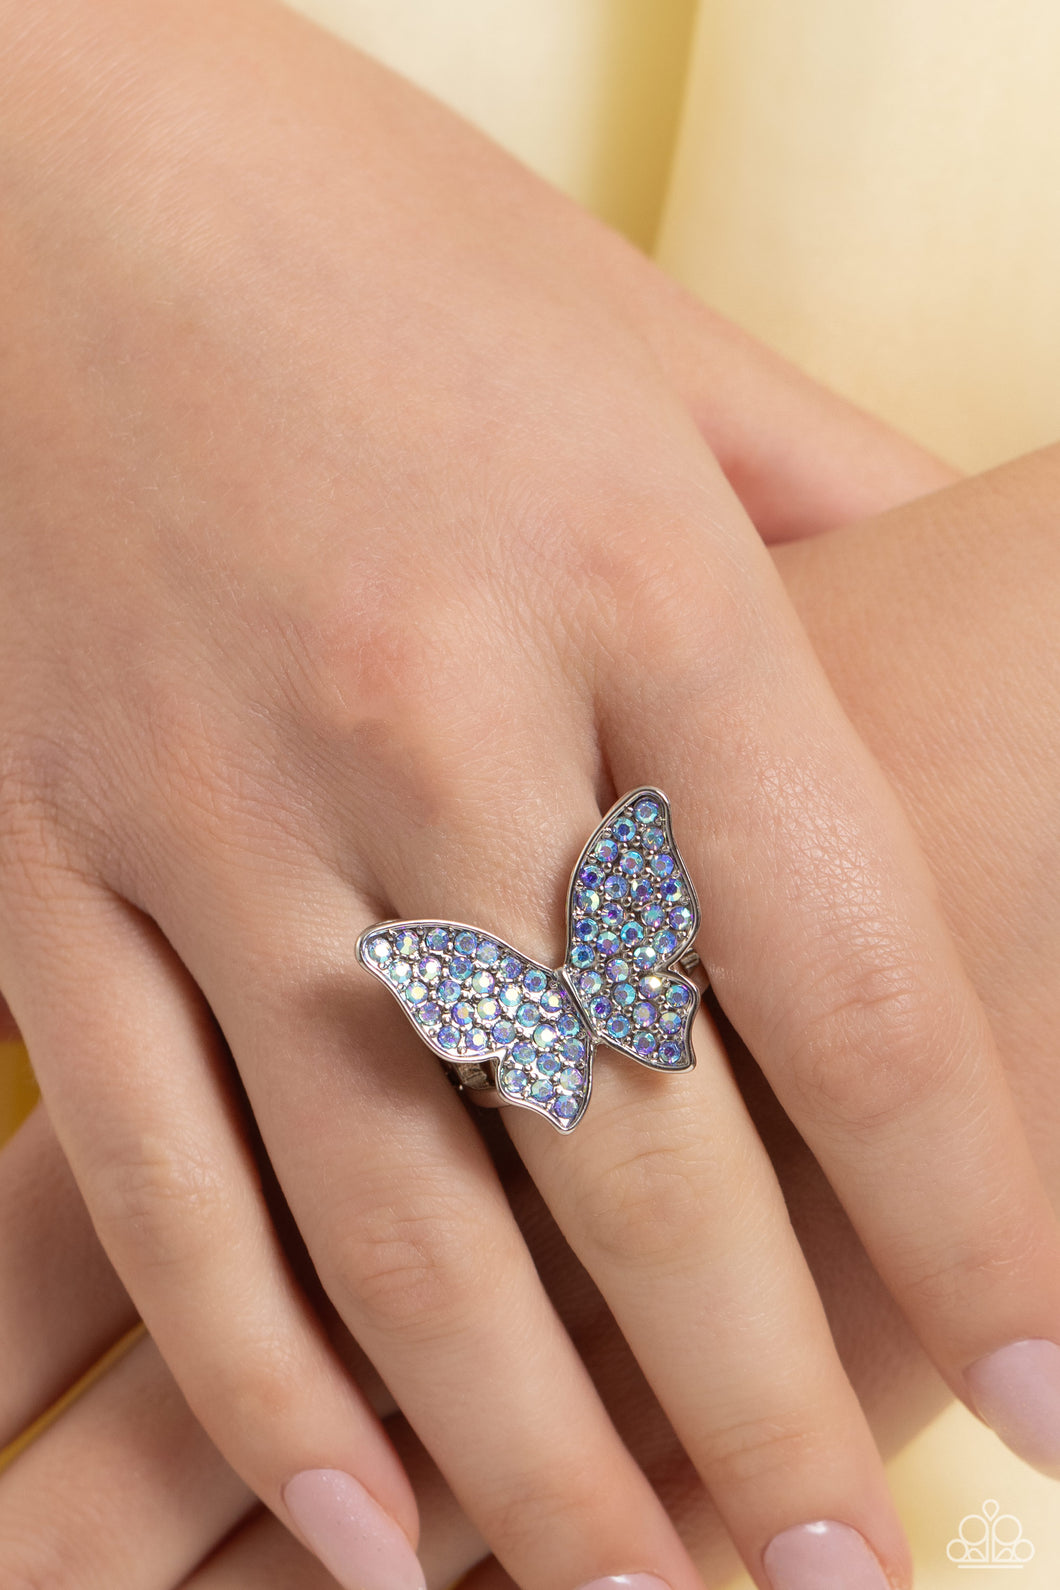 Paparazzi “High Time” Blue Butterfly Stretch Ring